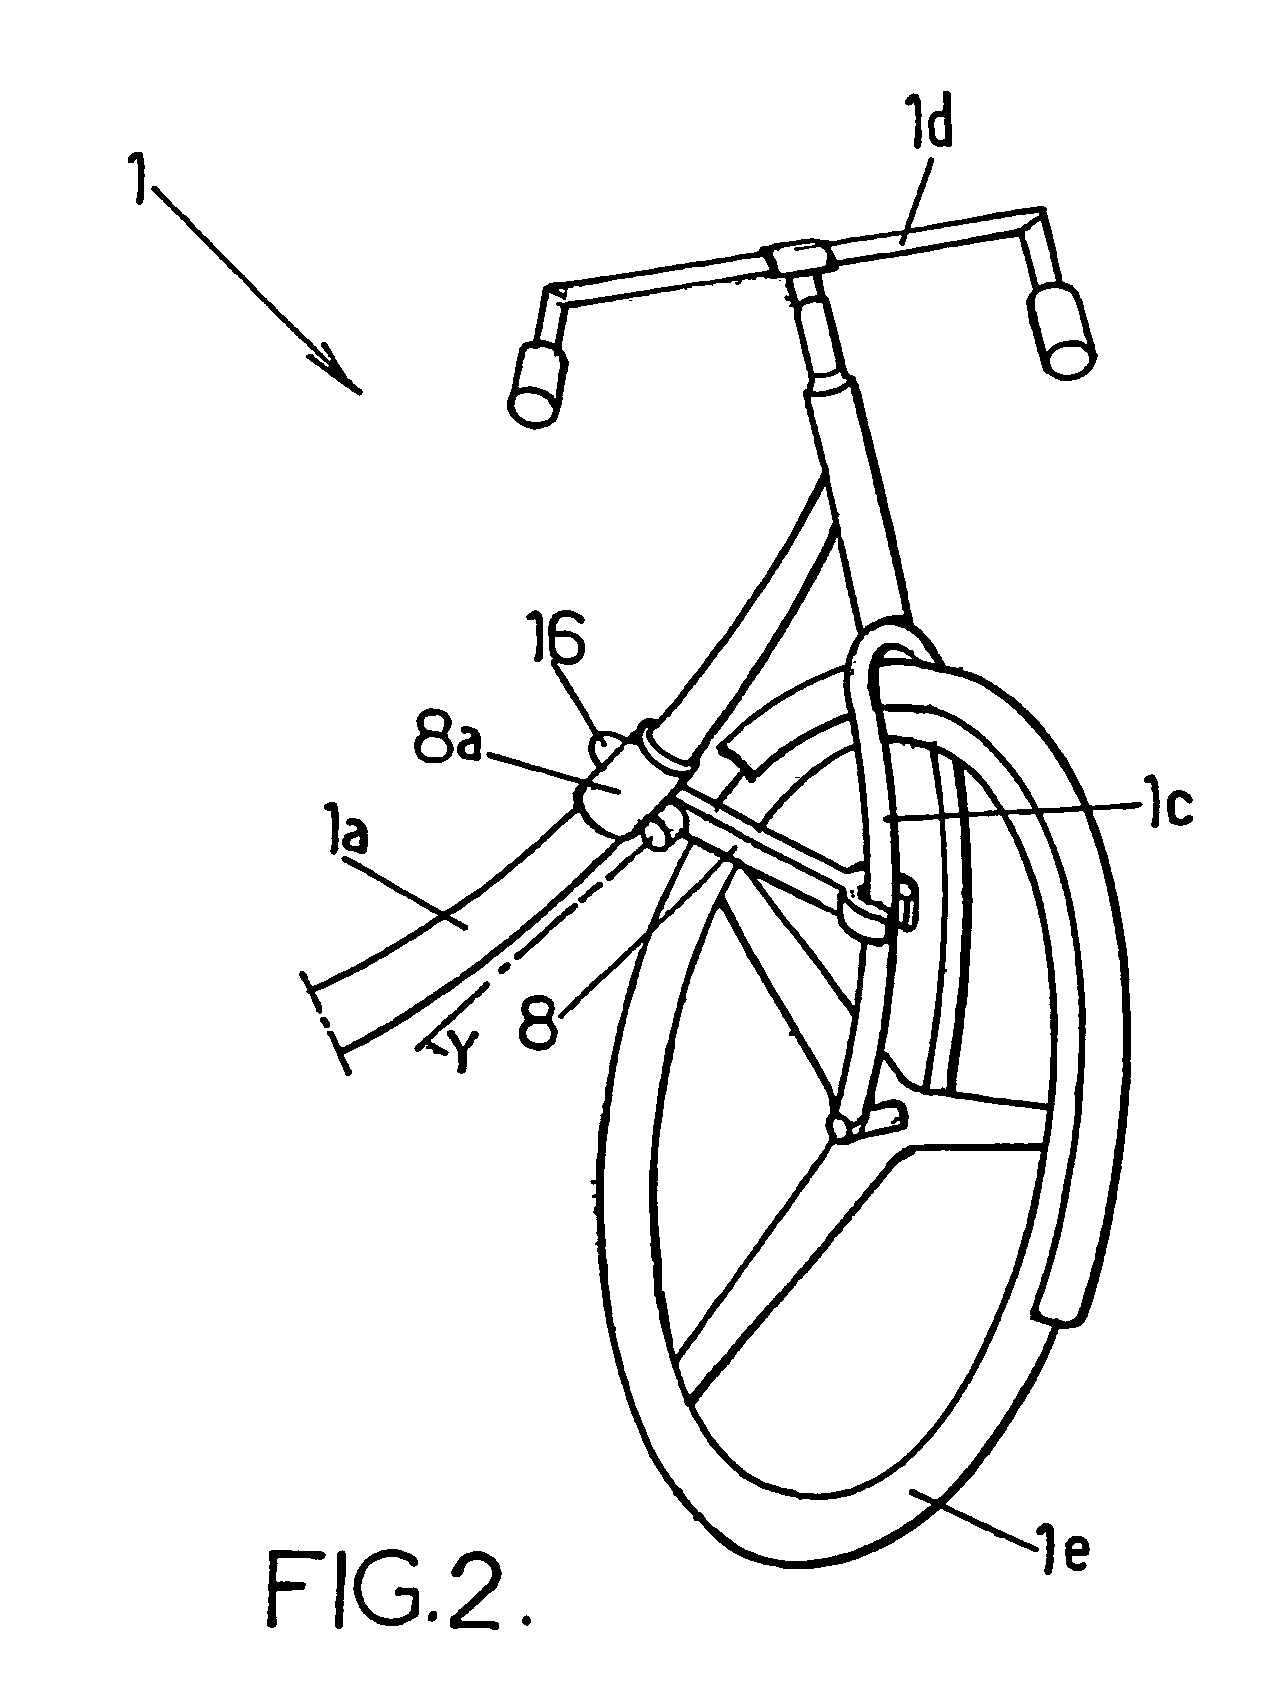 Automatic cycle storage system